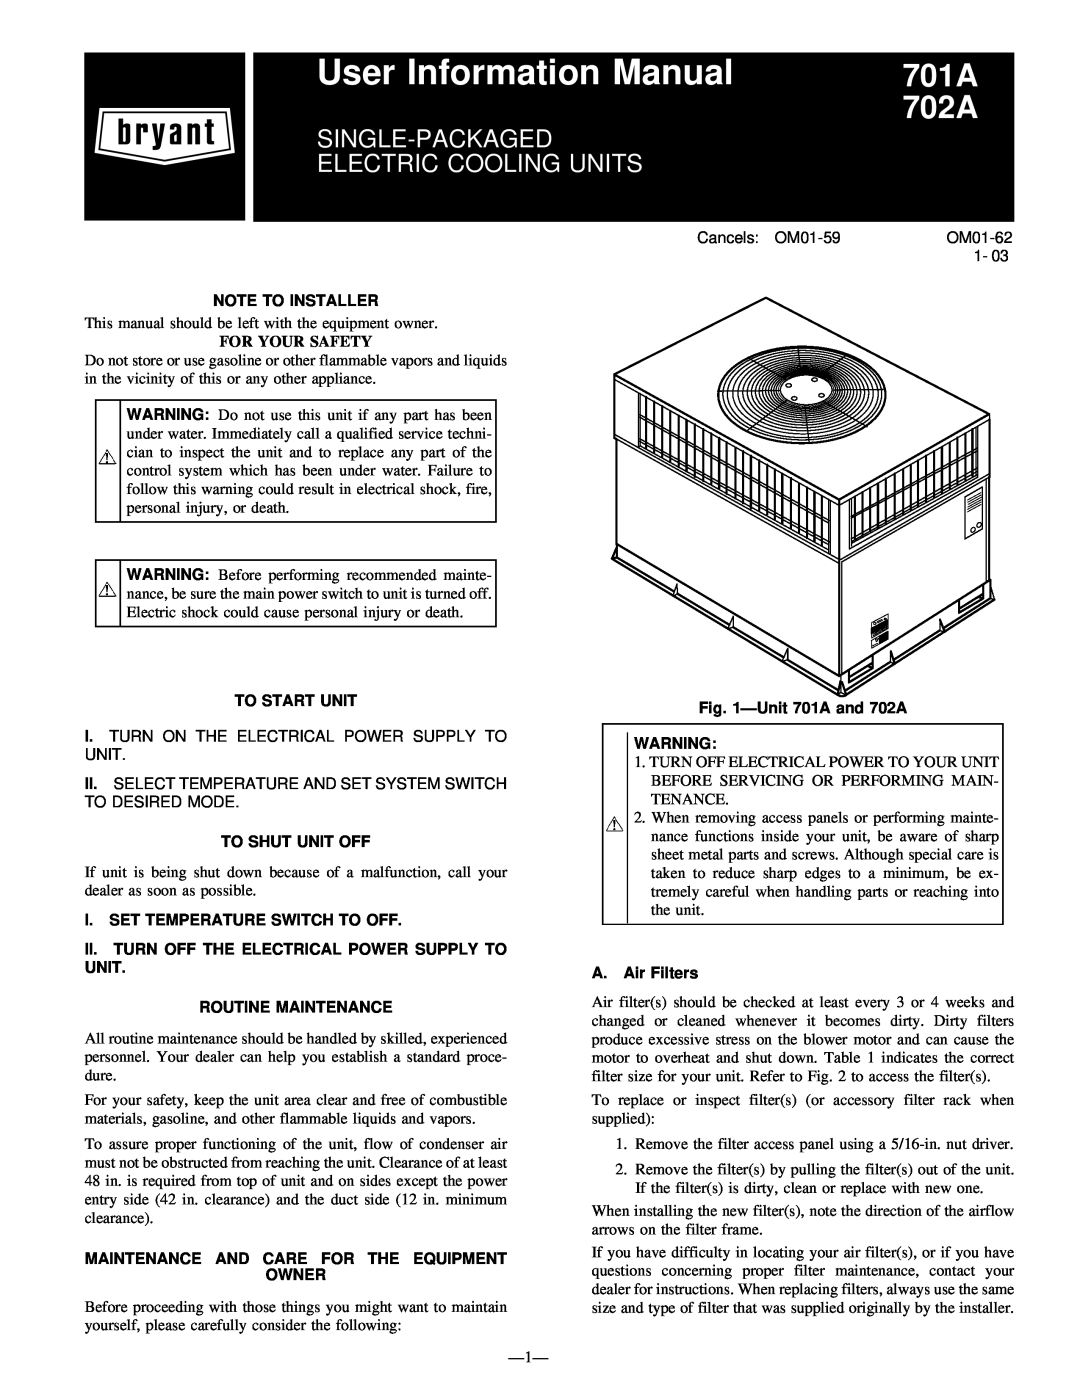 Bryant 701A manual Note To Installer, To Start Unit, To Shut Unit Off, I.Set Temperature Switch To Off, A.Air Filters 